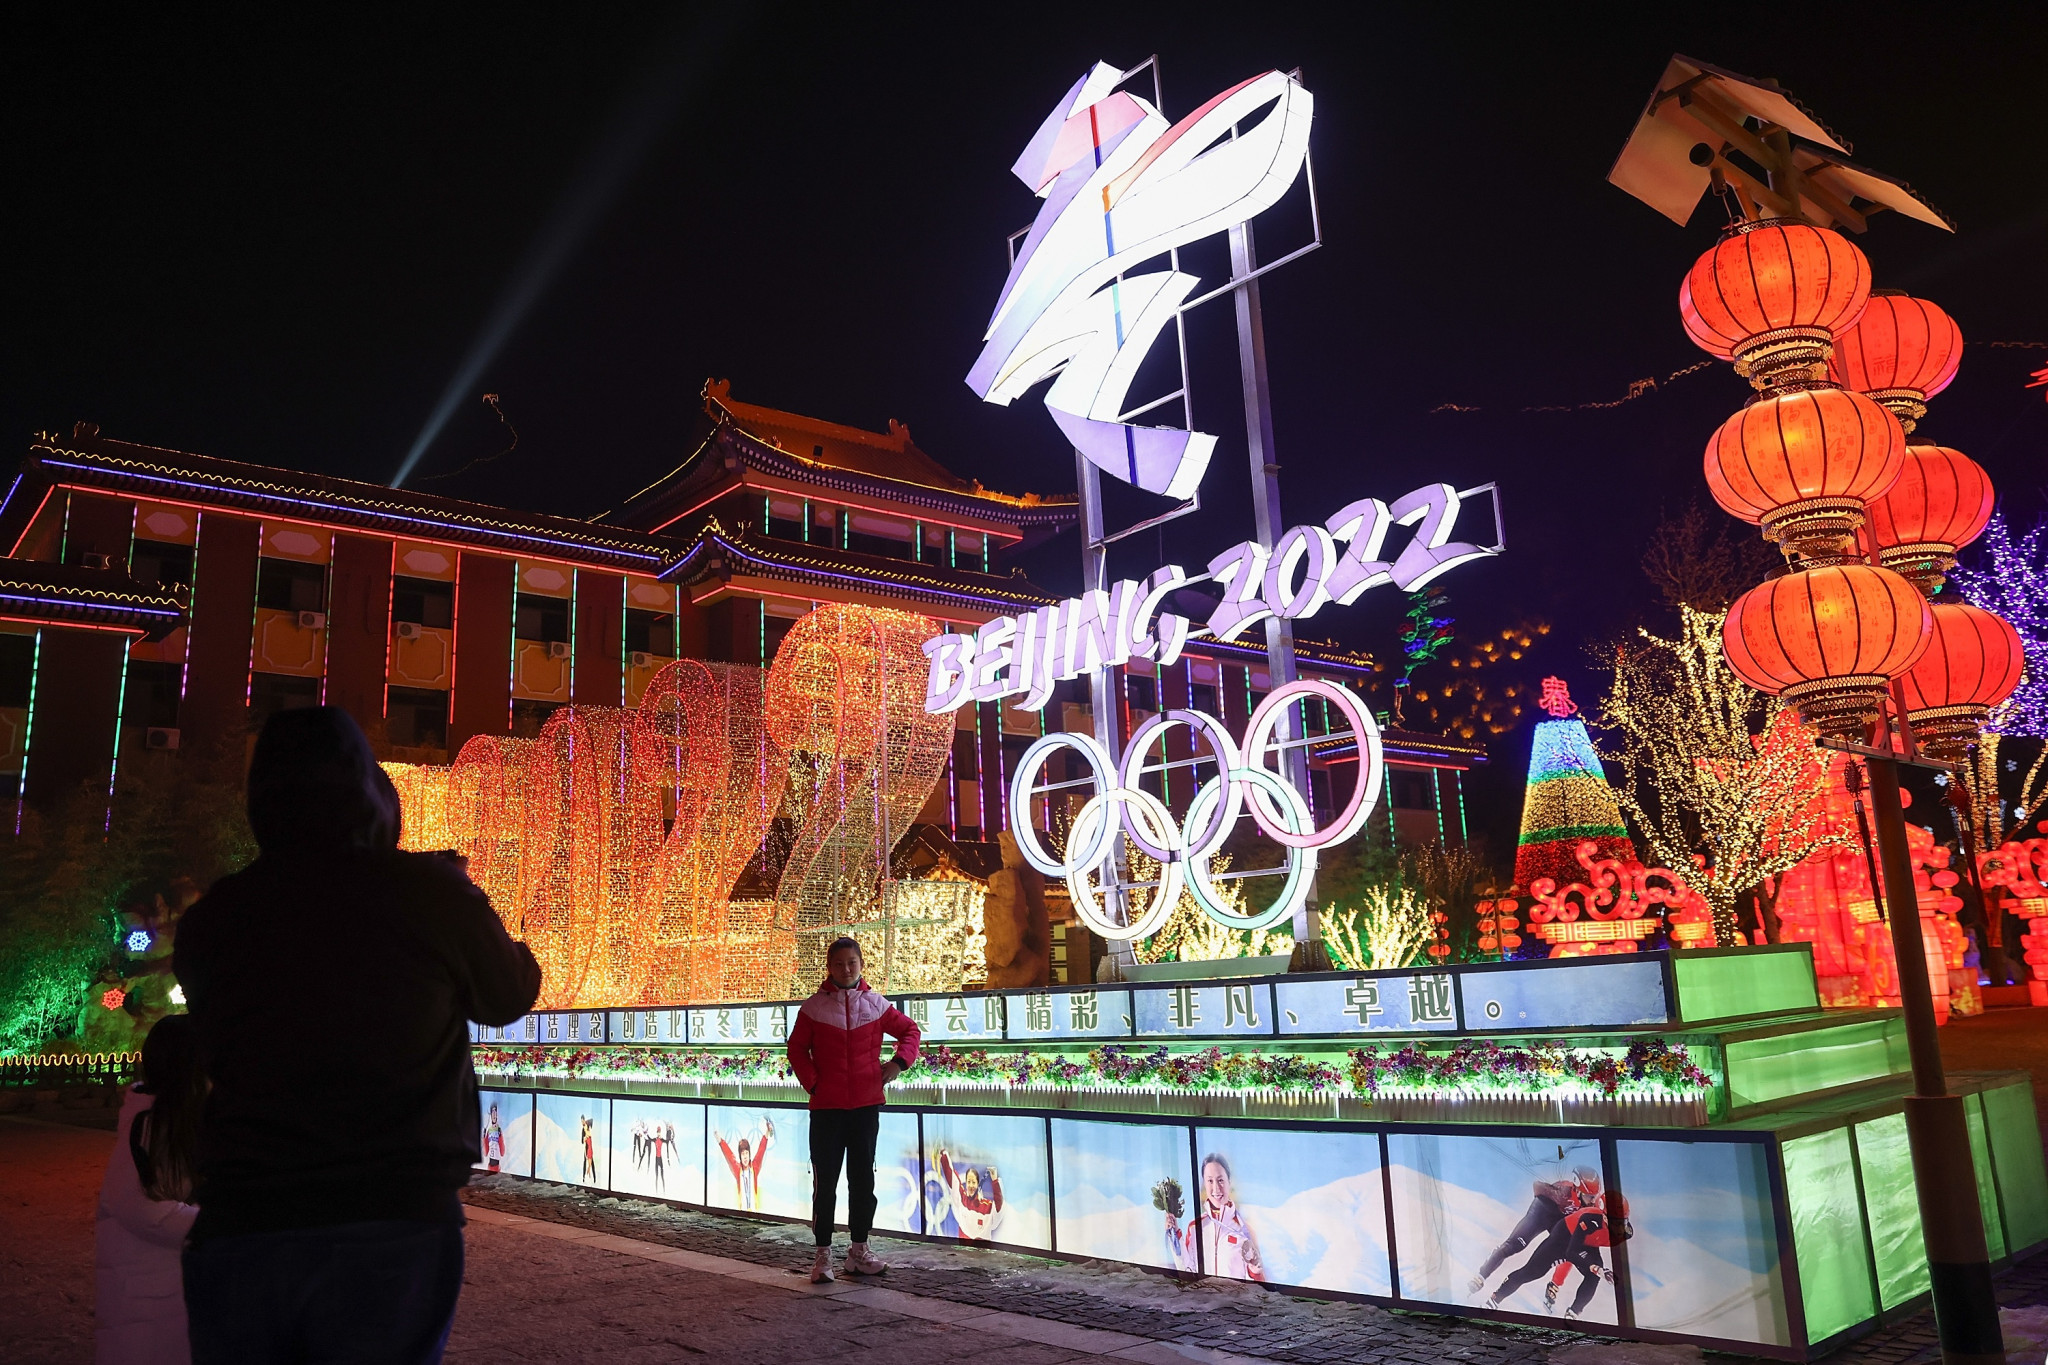 China - the hosts of next year's Winter Olympics - has been criticised for its human rights record ©Getty Images